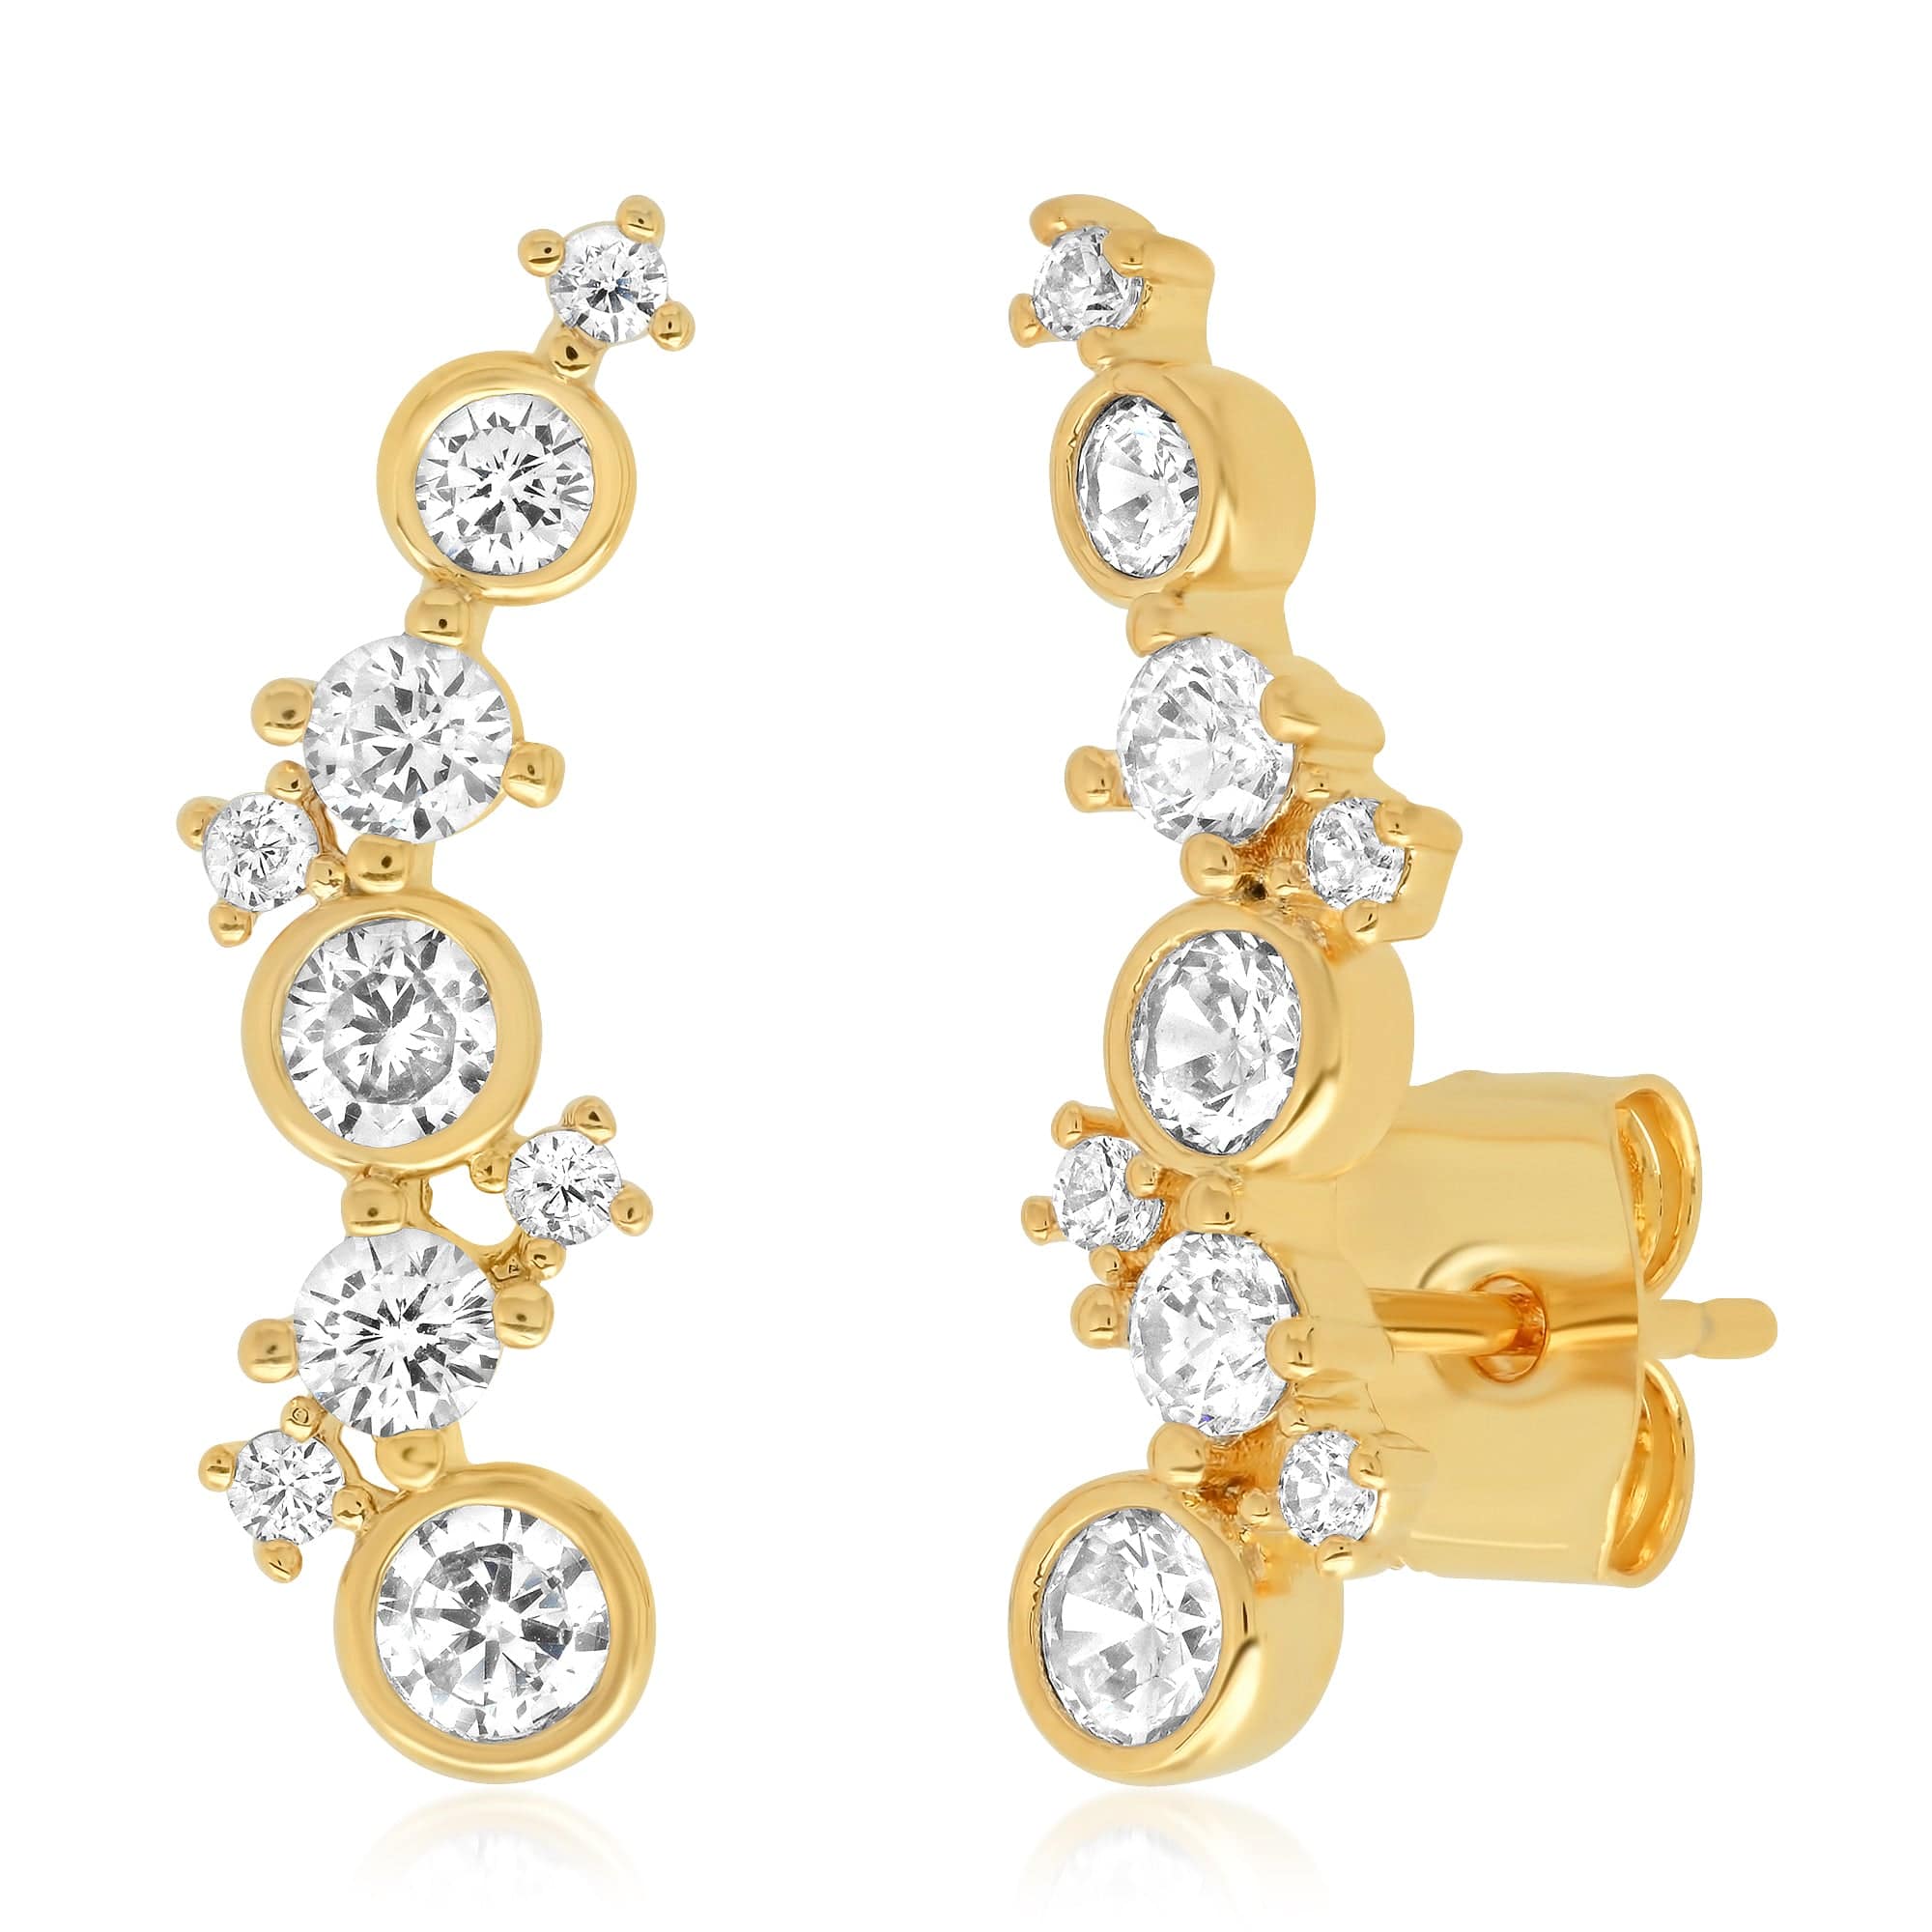 Elegant Gold Climbers With Cz Accents – TAI JEWELRY